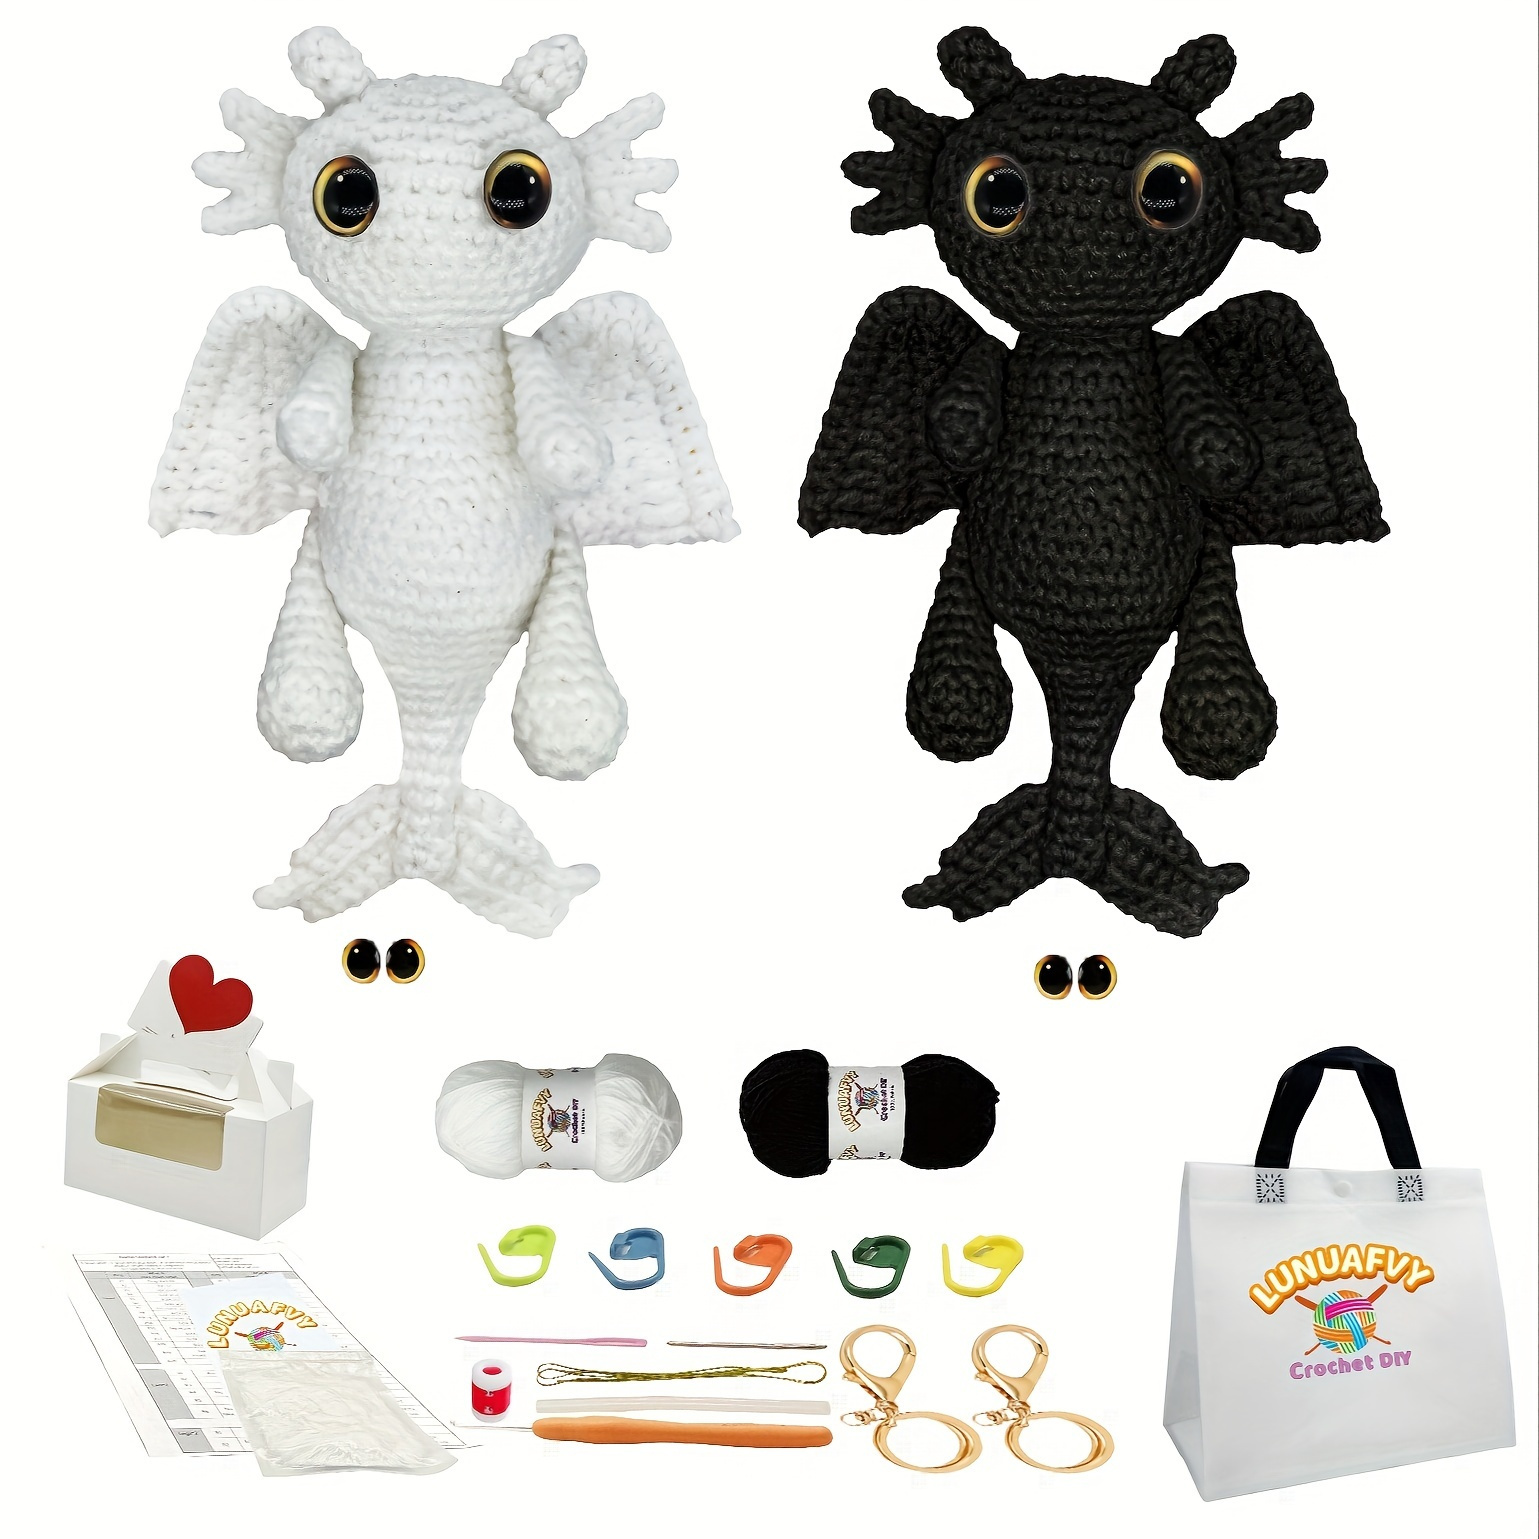 

1set Dragon Crochet Kits For Beginners, Starter Crochet Kit All-in-one Complete Crochet Kit Learn To Crochet Sets With Instructions And Step By Step Video Tutorials For Adults